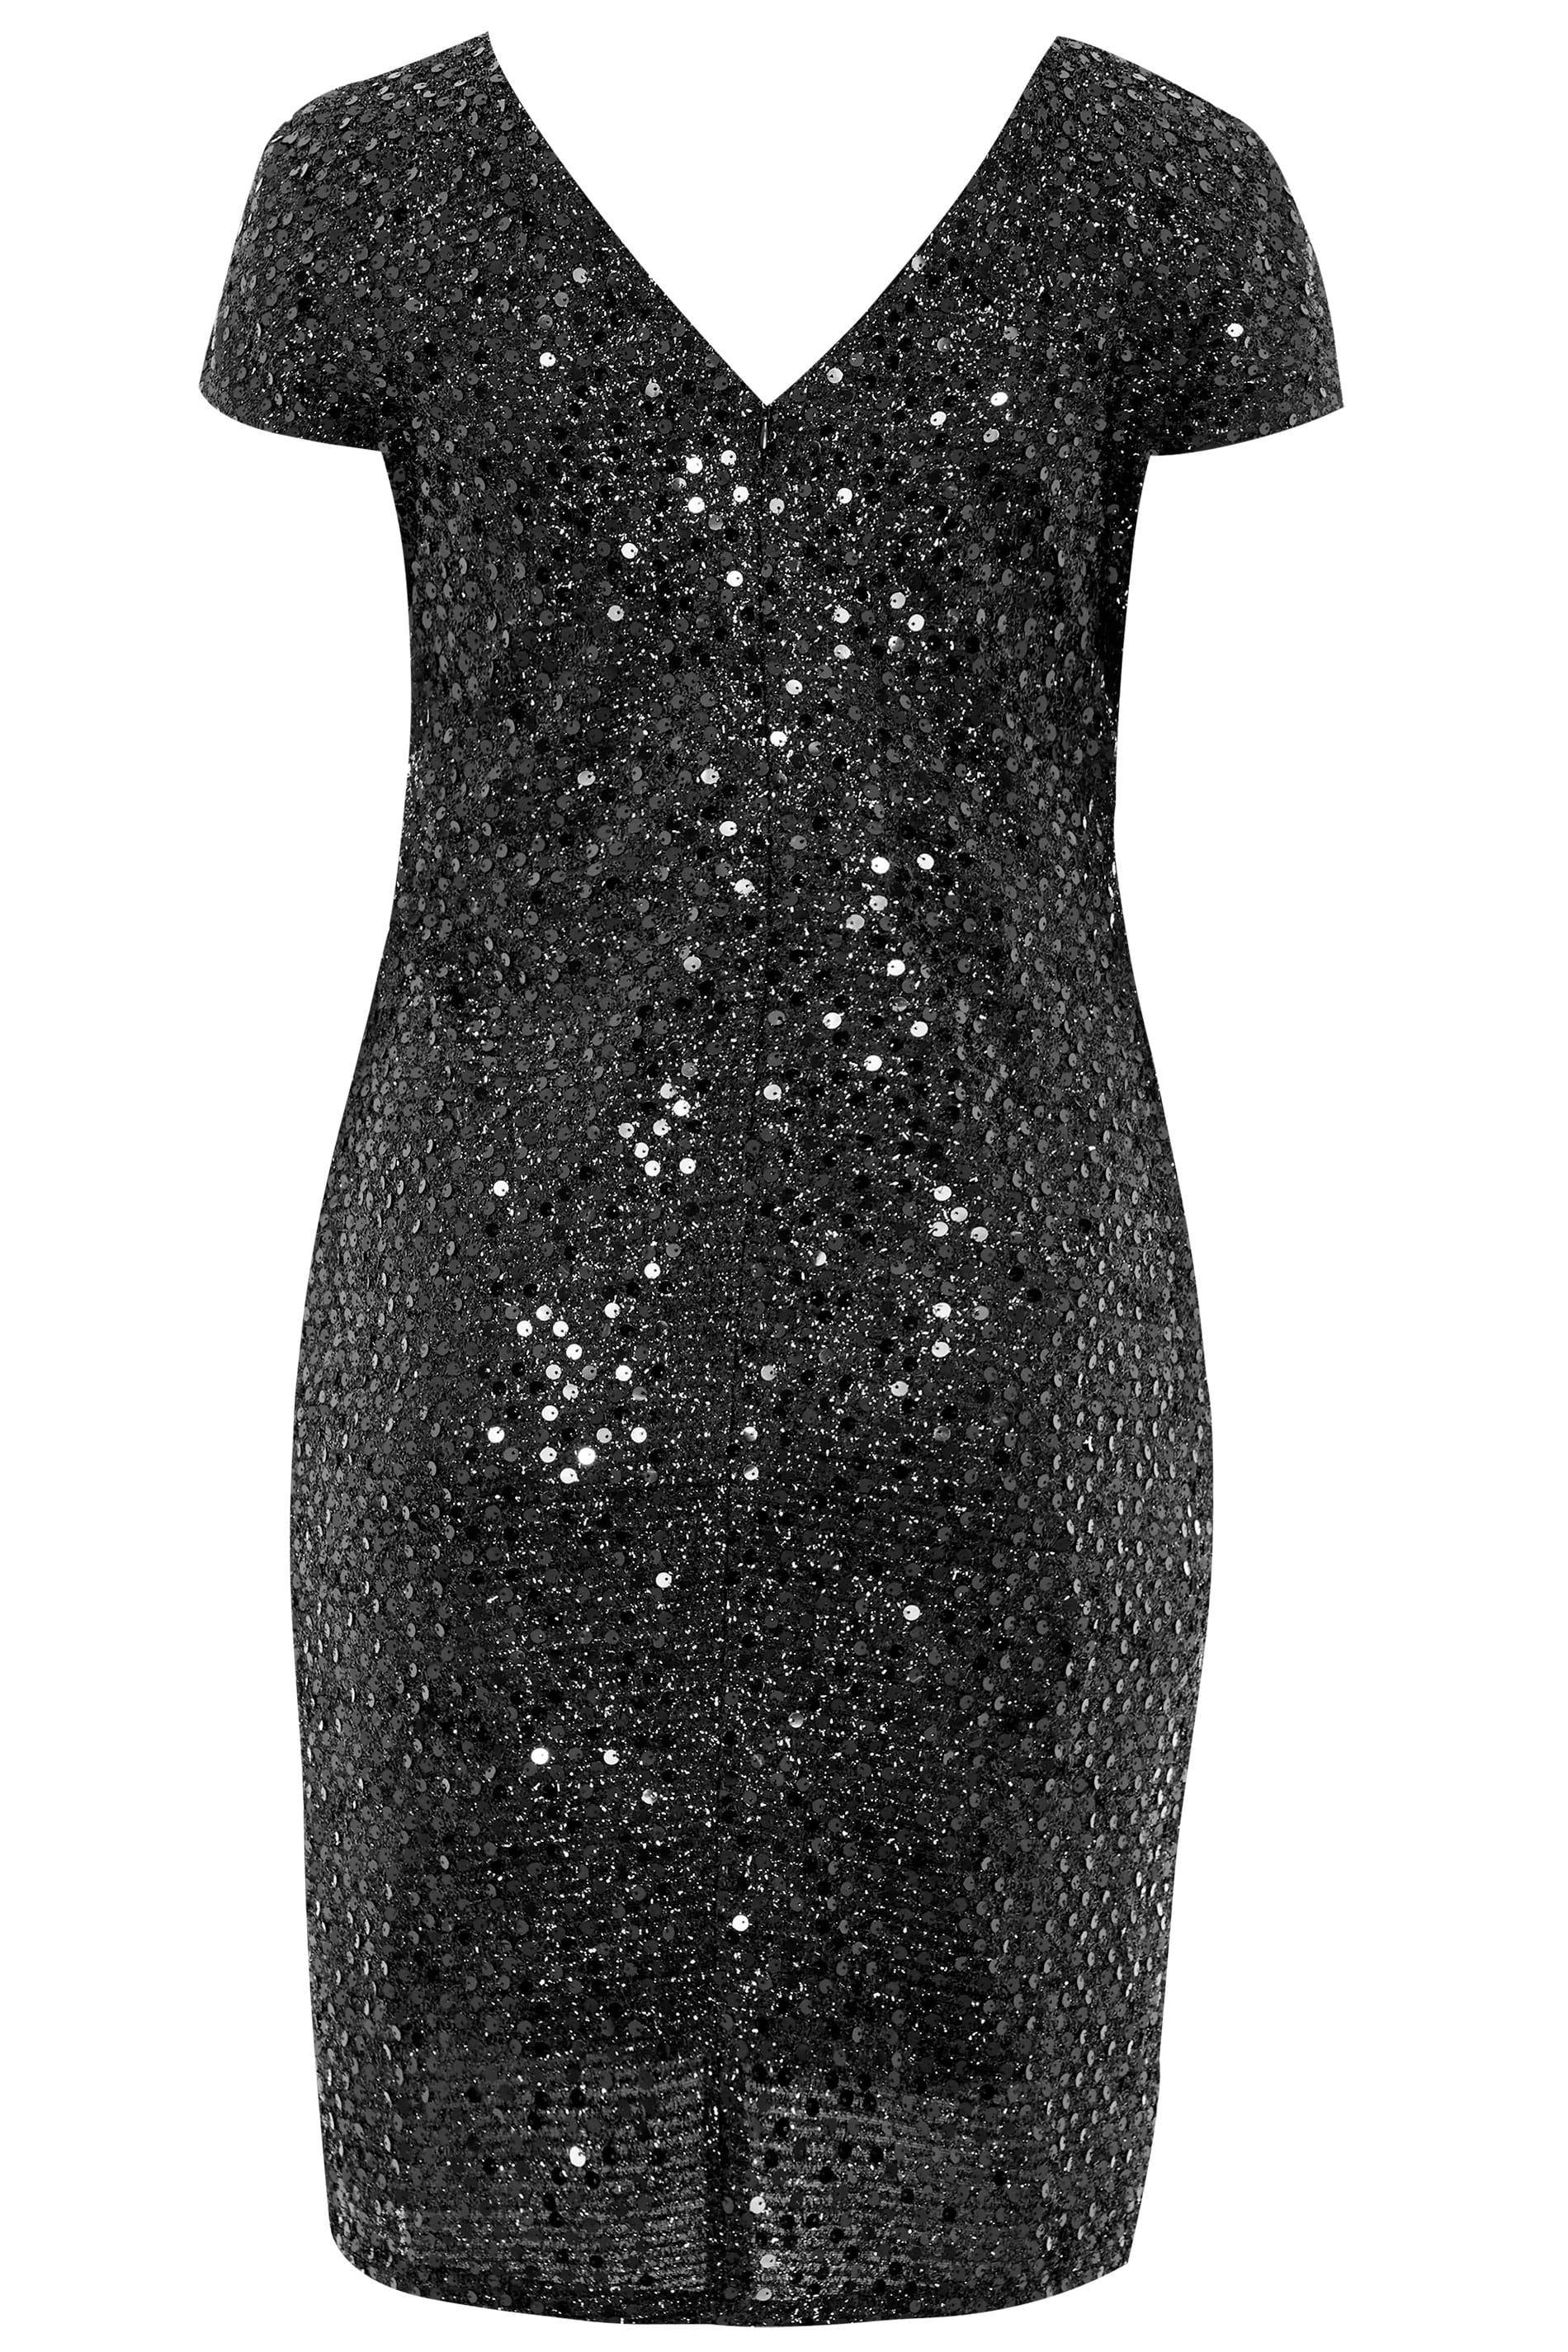 YOURS LONDON Black Tinsel & Sequin Embellished Shift Dress | Yours Clothing